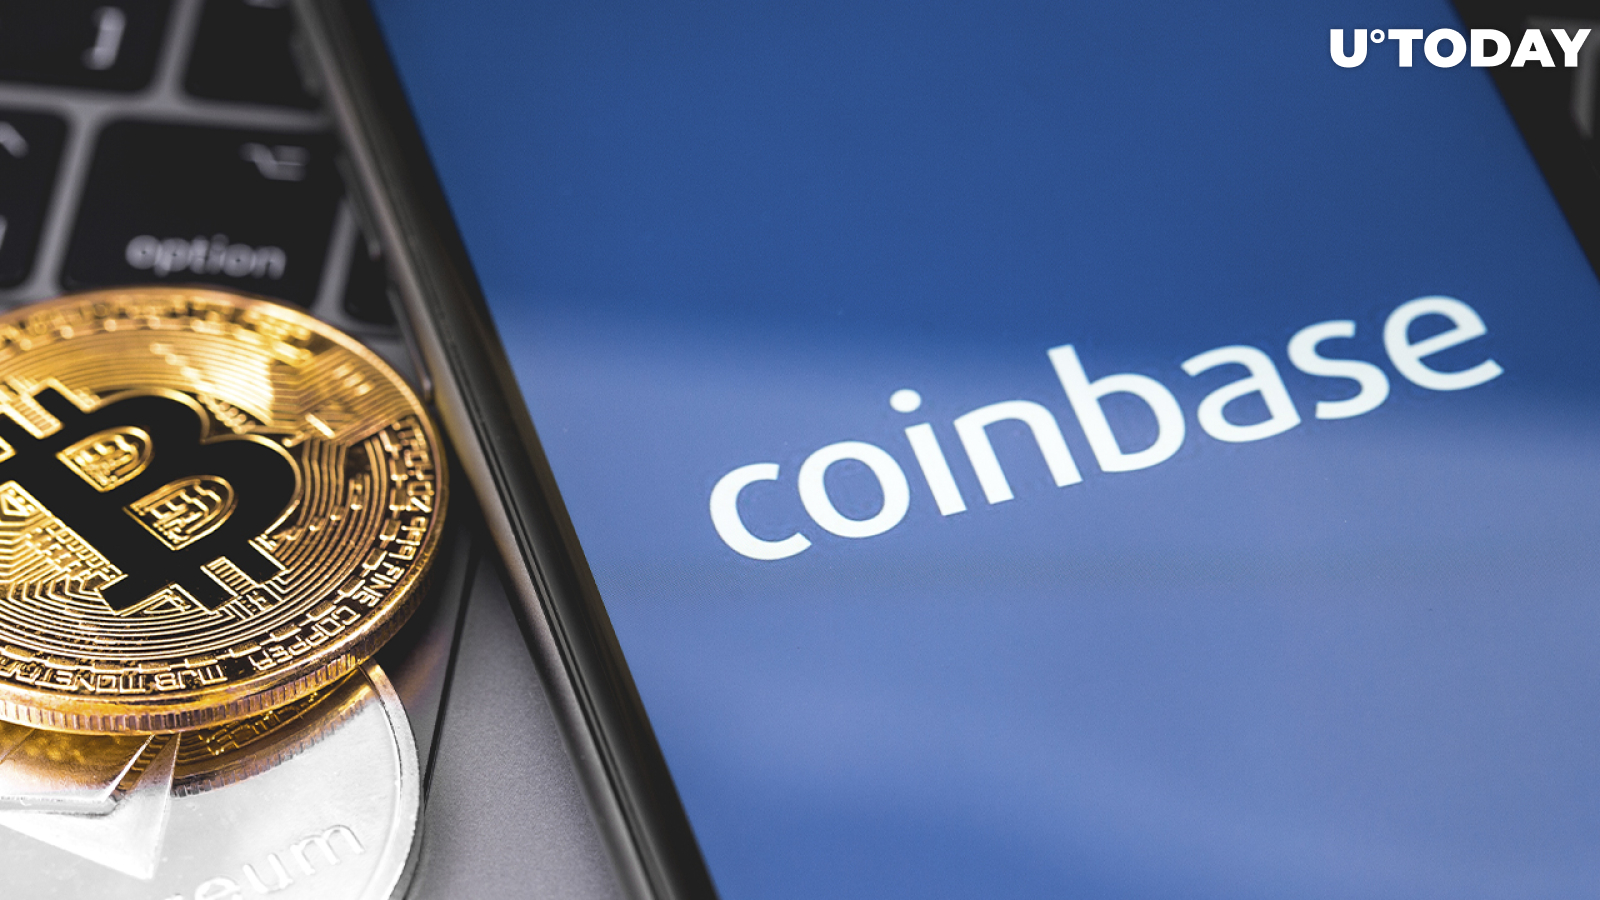 $669 Million in Bitcoin Moved Between Coinbase and Unknown Addresses